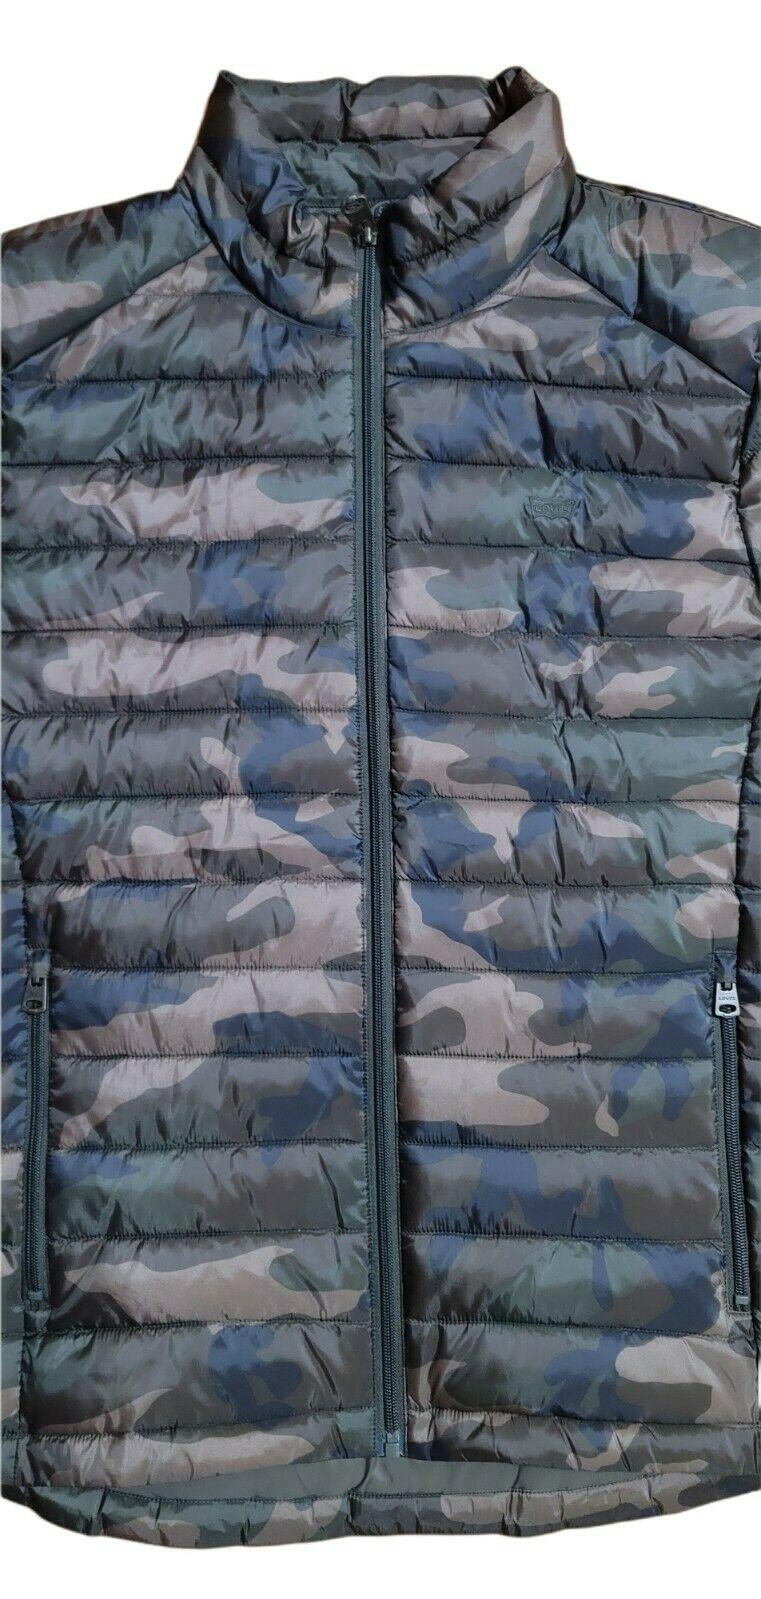 Levi's Men’s Packable Lightweight Puffer Jacket Camouflage Size M - SVNYFancy